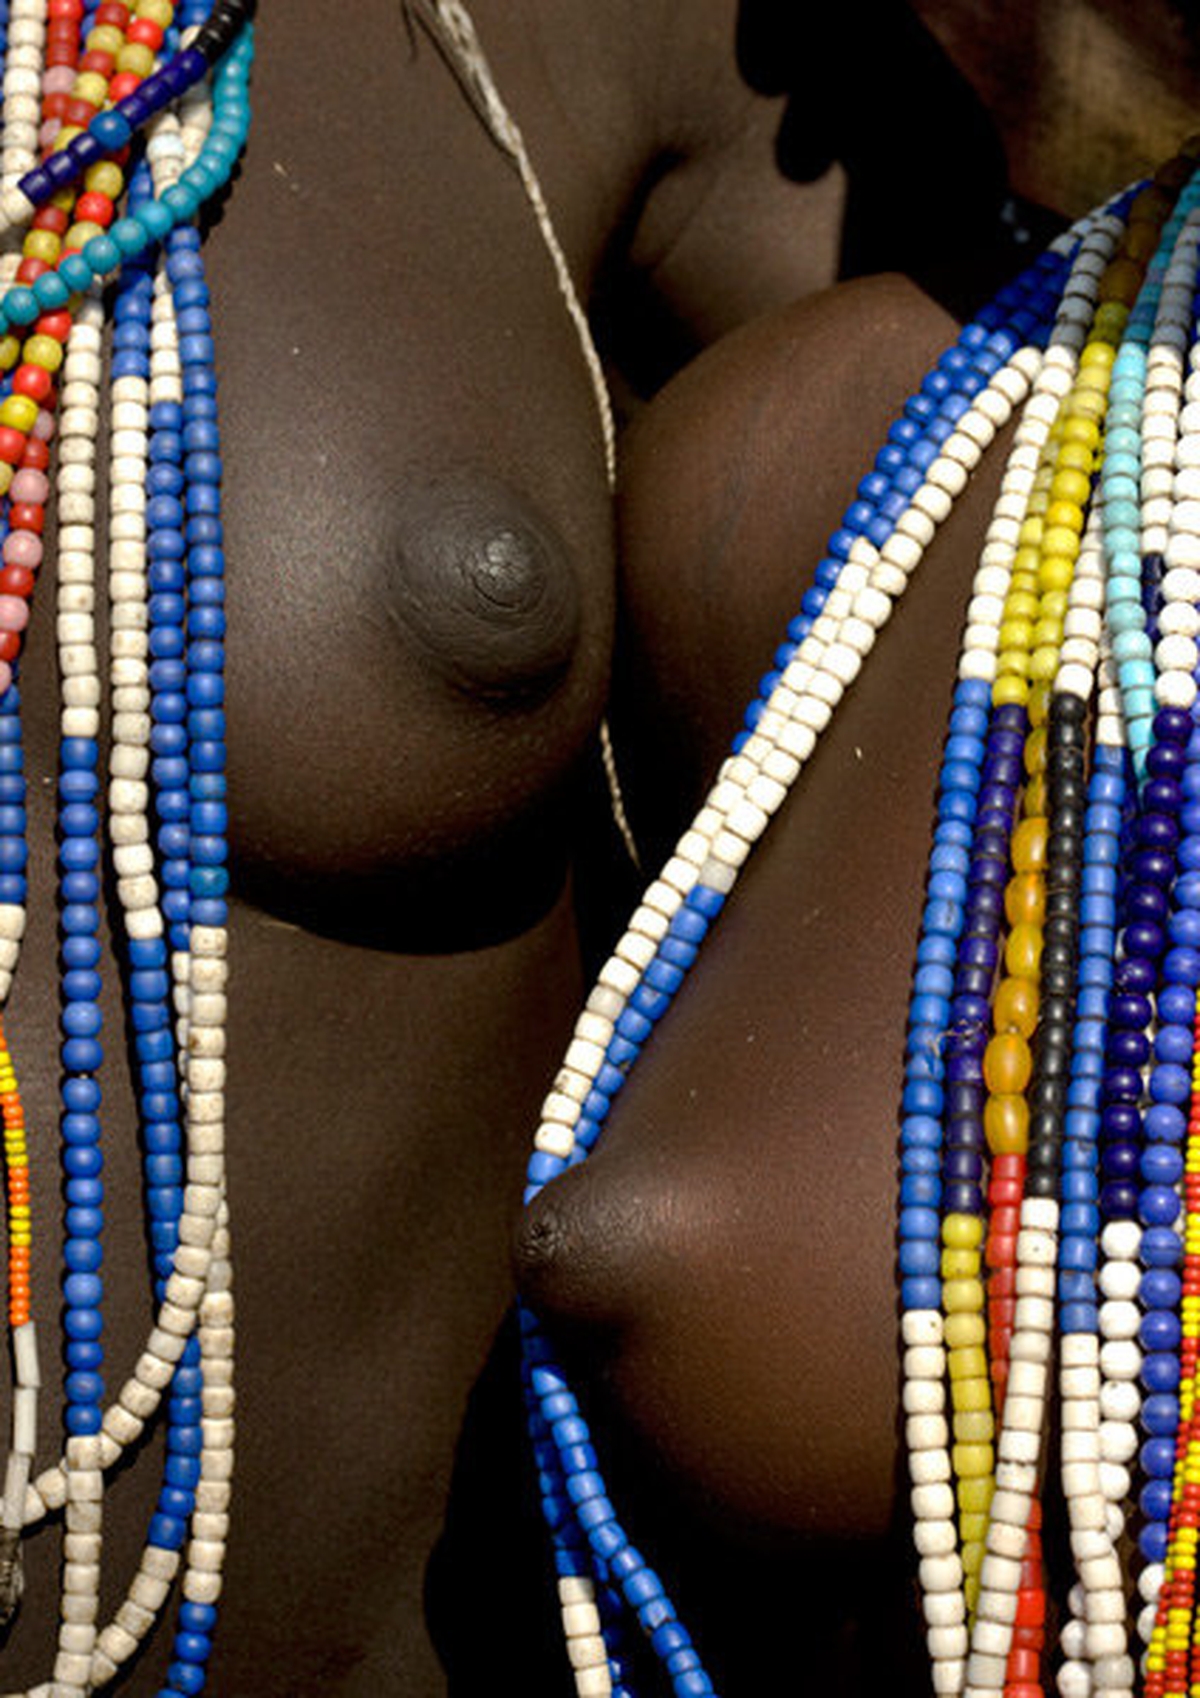 African boob free pic